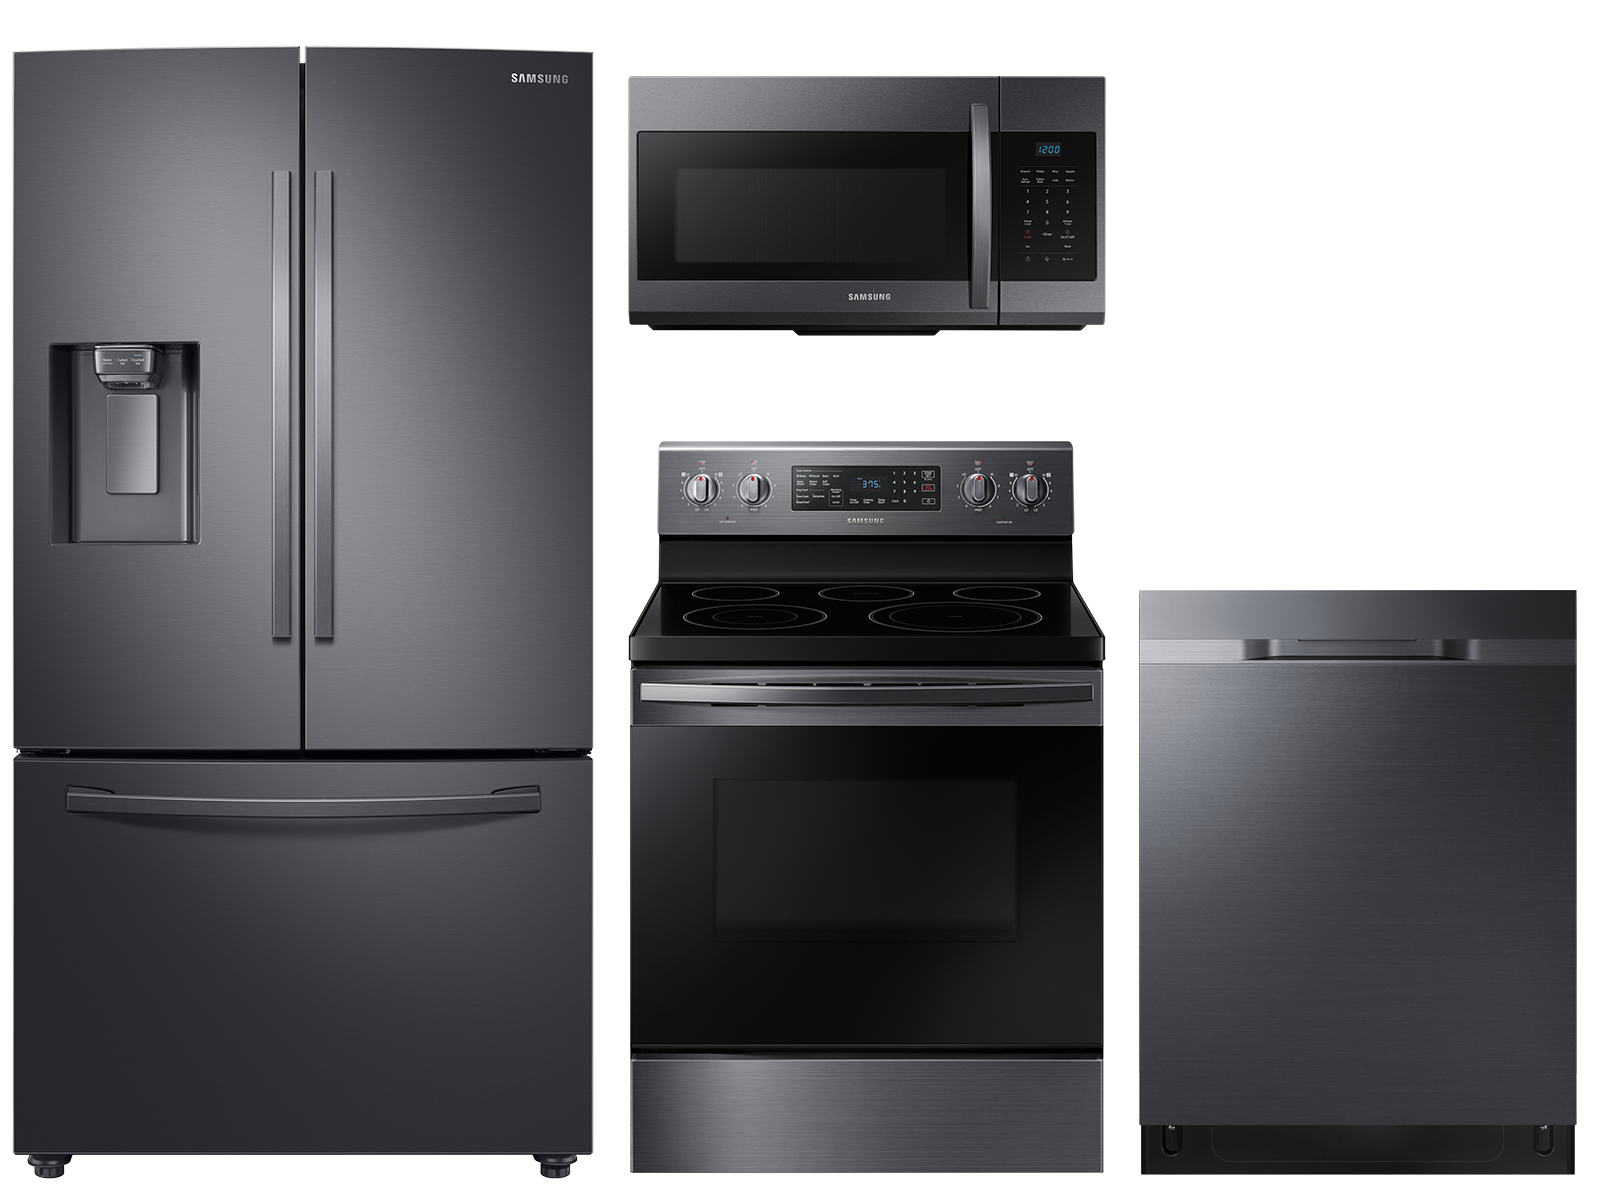 Samsung Large Capacity 3-door Refrigerator + Electric Range with Convection + StormWash™ Dishwasher + Microwave in Black Stainless